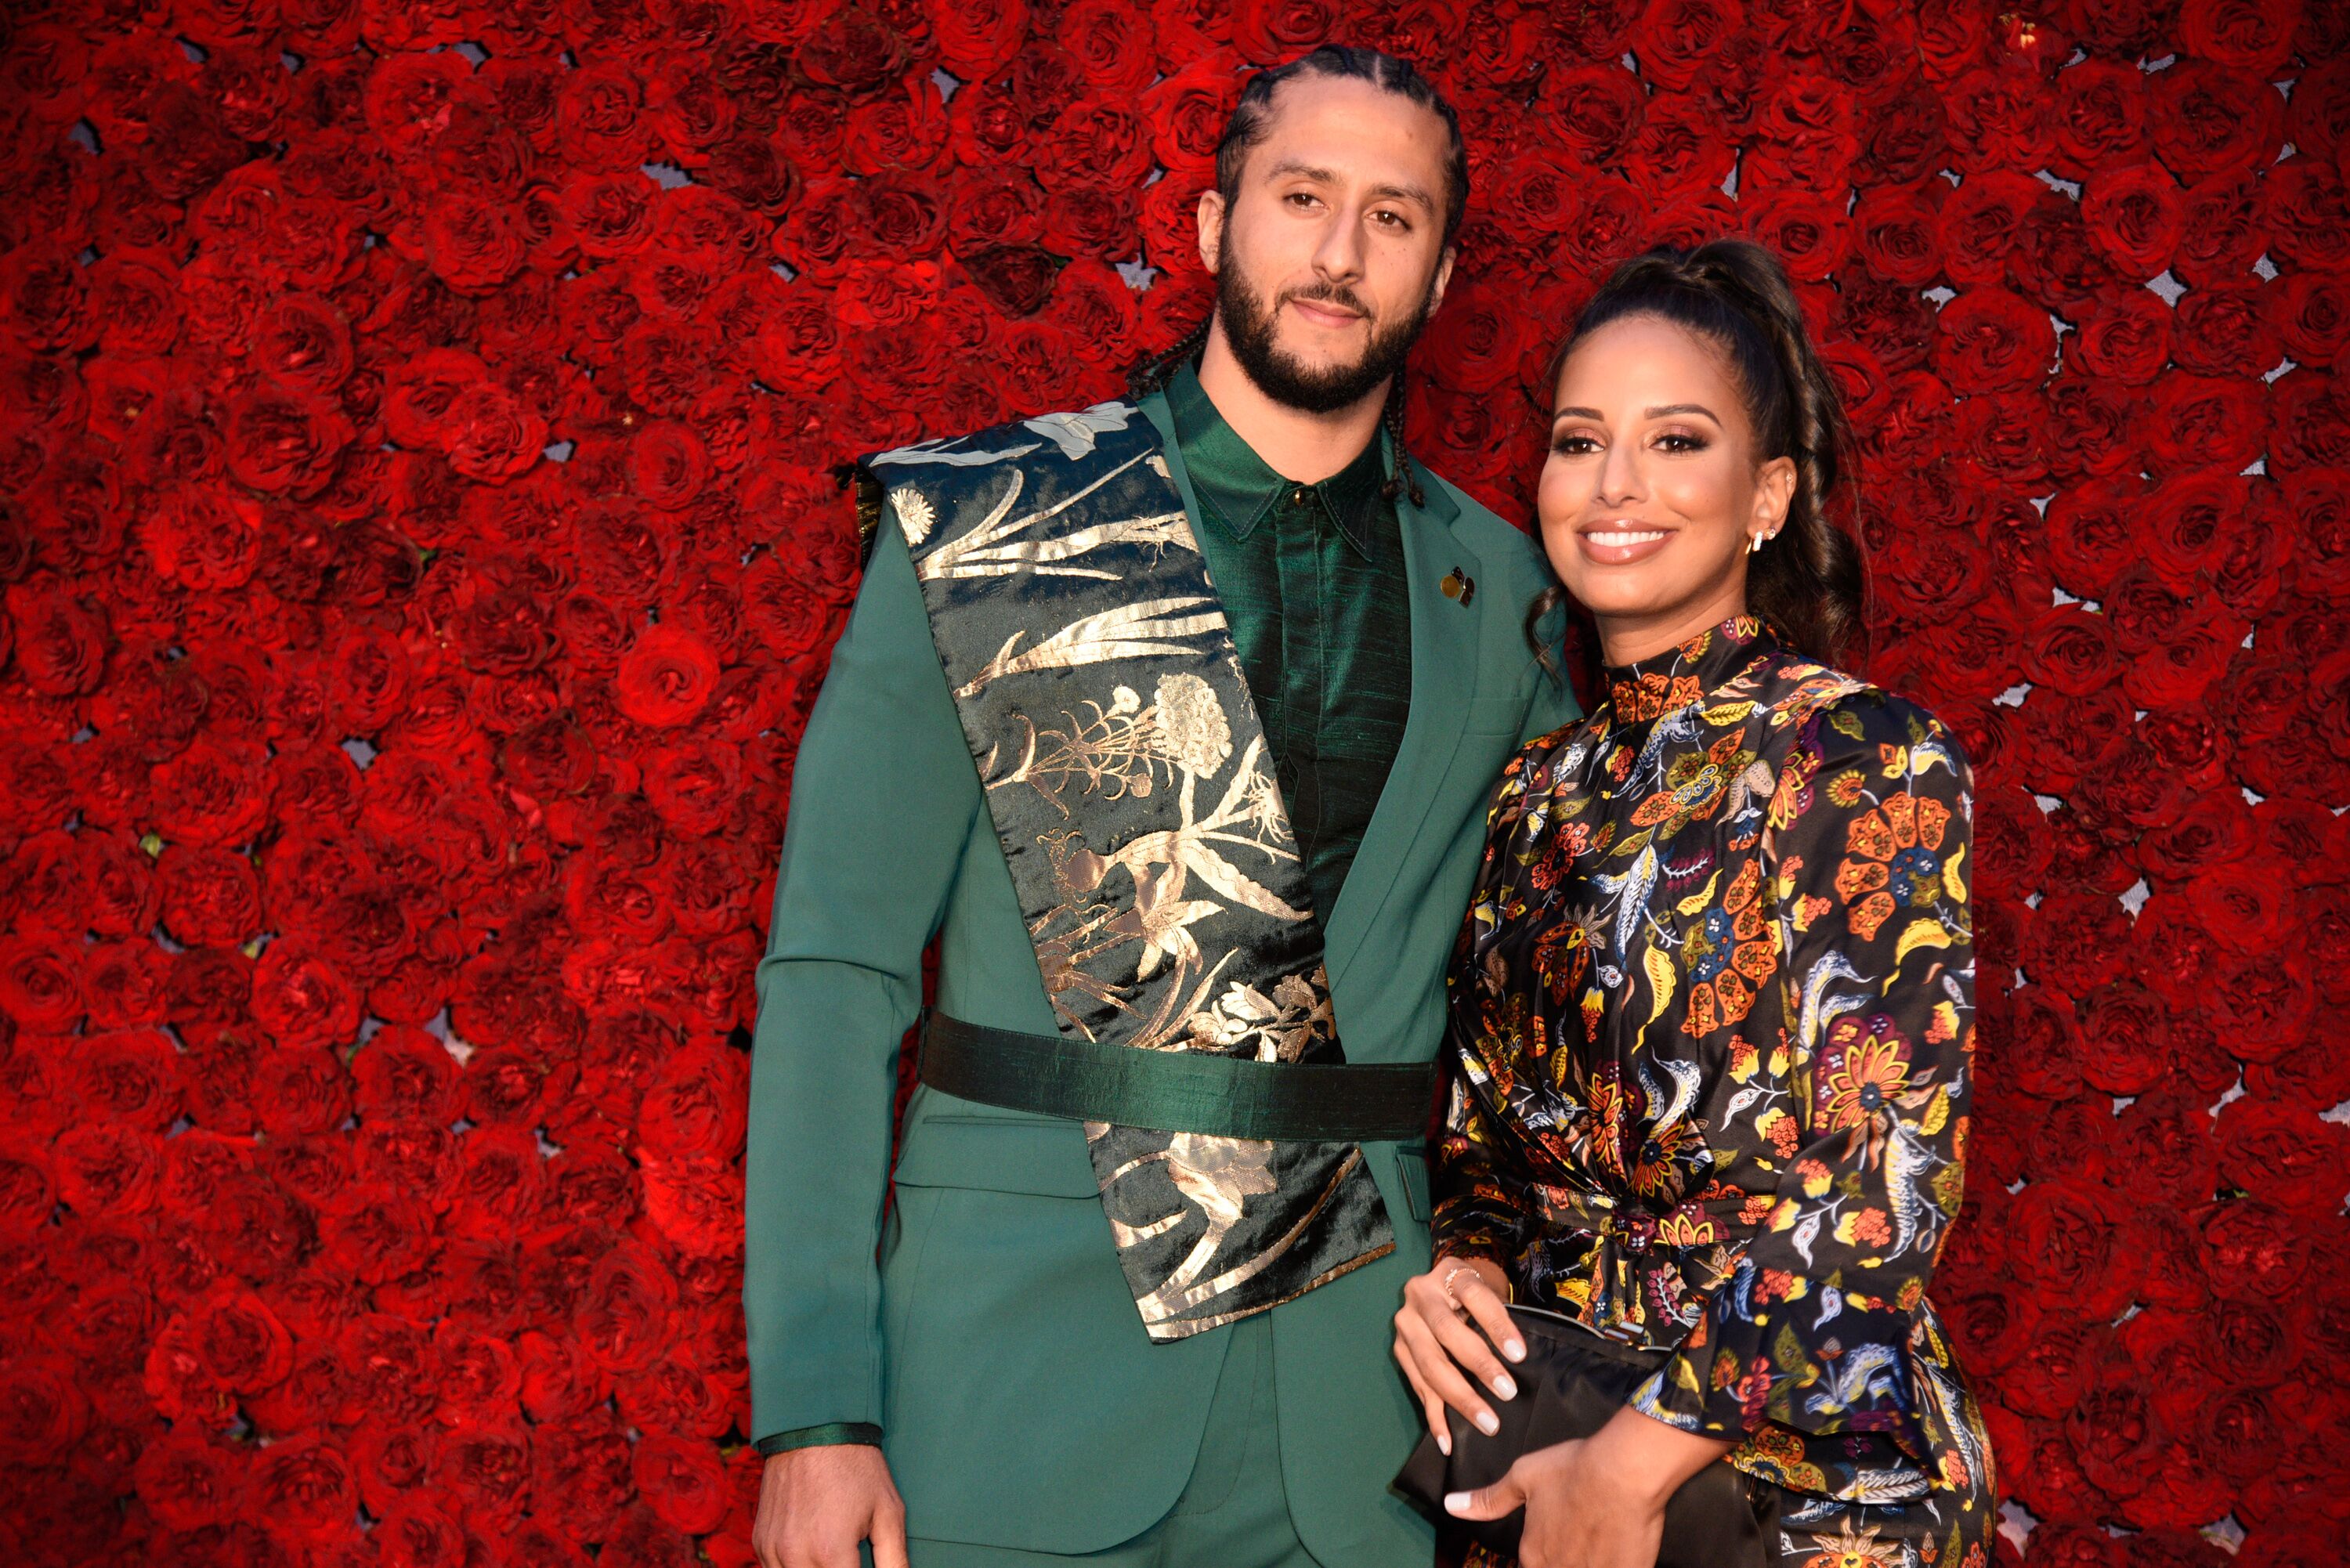 Colin Kaepernick and Nessa Diab attend Tyler Perry Studios Grand Opening Gala in 2019 in Atlanta, Georgia | Source: Getty Images